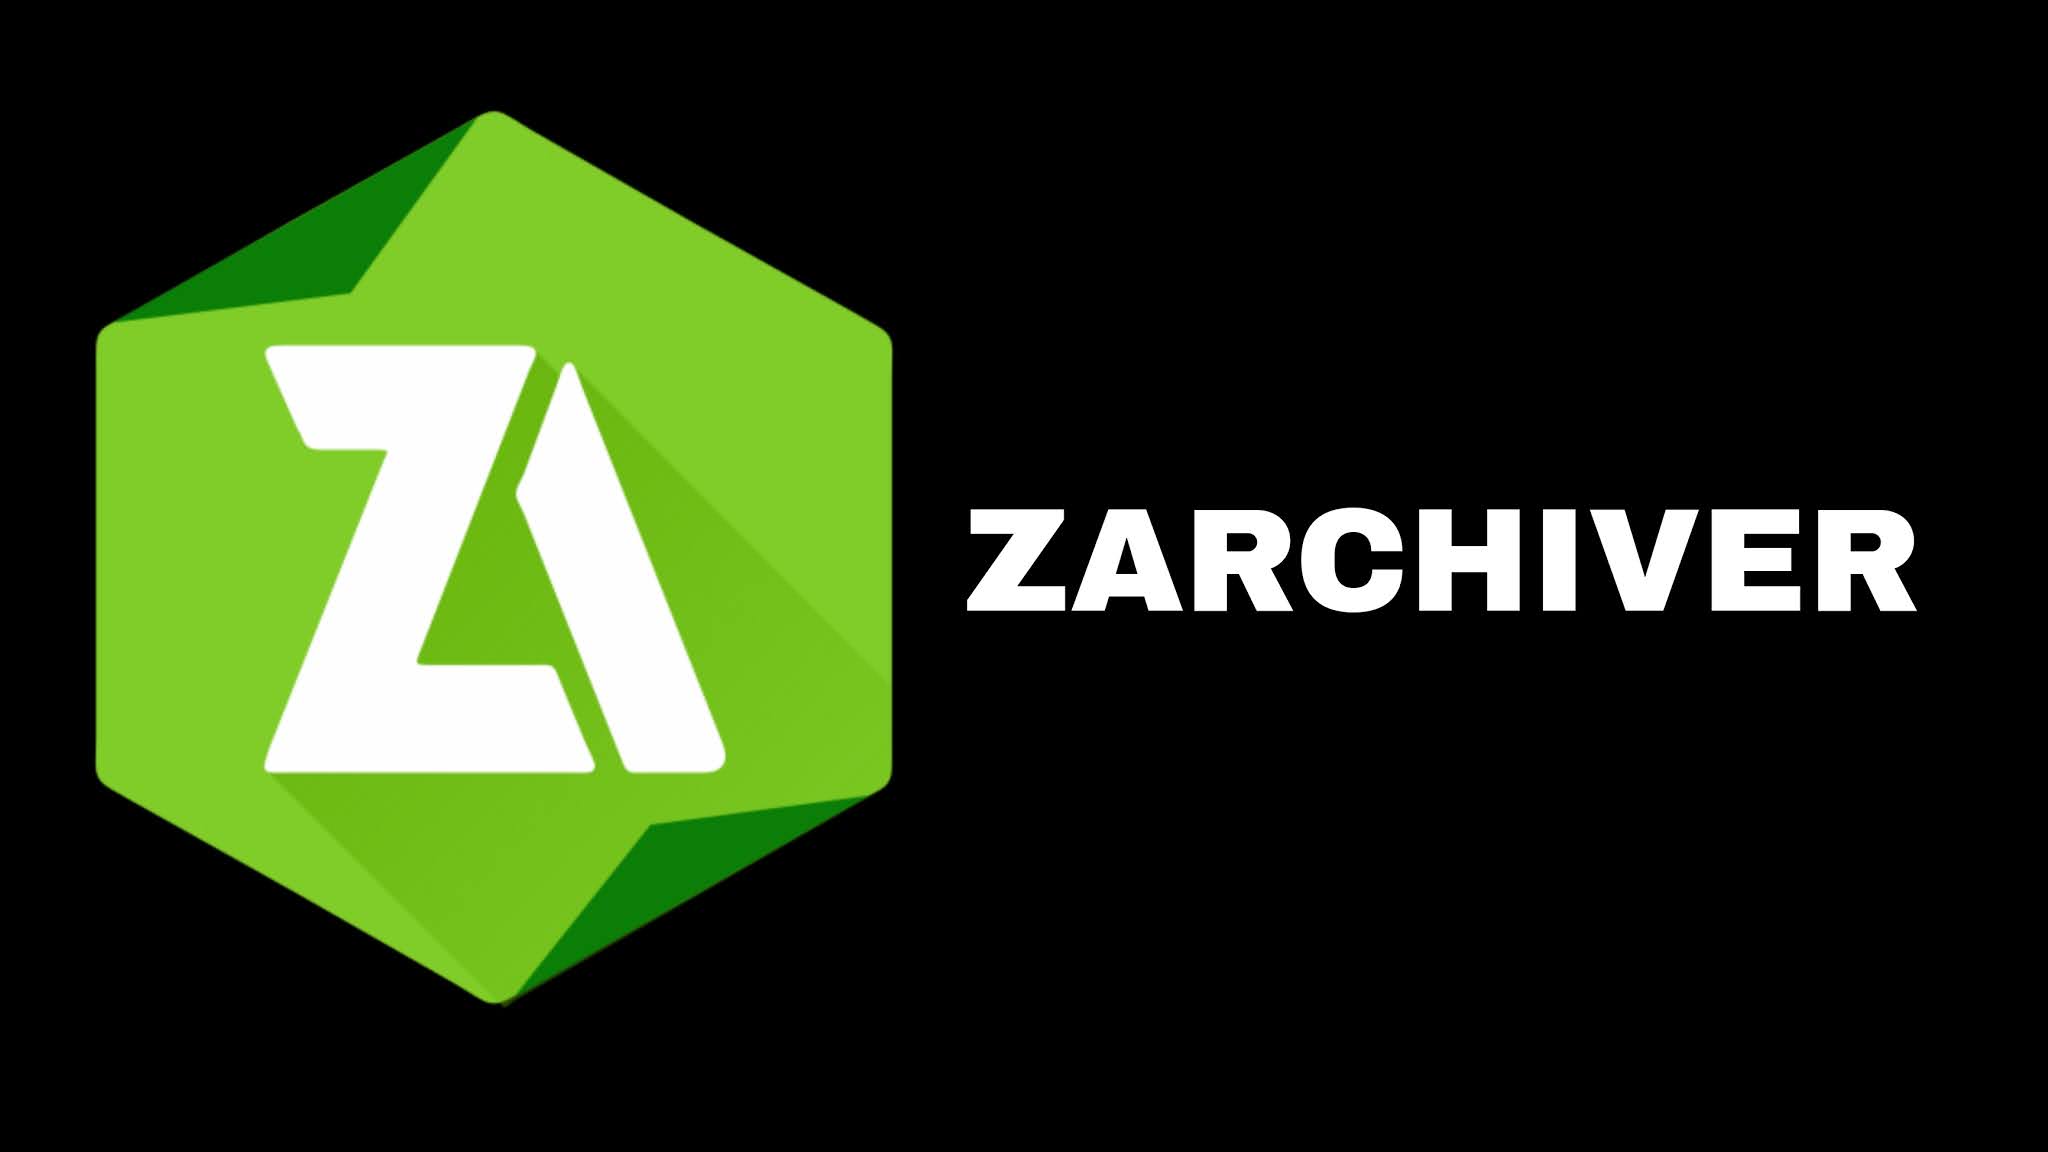 Https top androidd ru. ZARCHIVER Pro. Иконка ZARCHIVER. ZARCHIVER Pro APK. ZARCHIVER кэш.